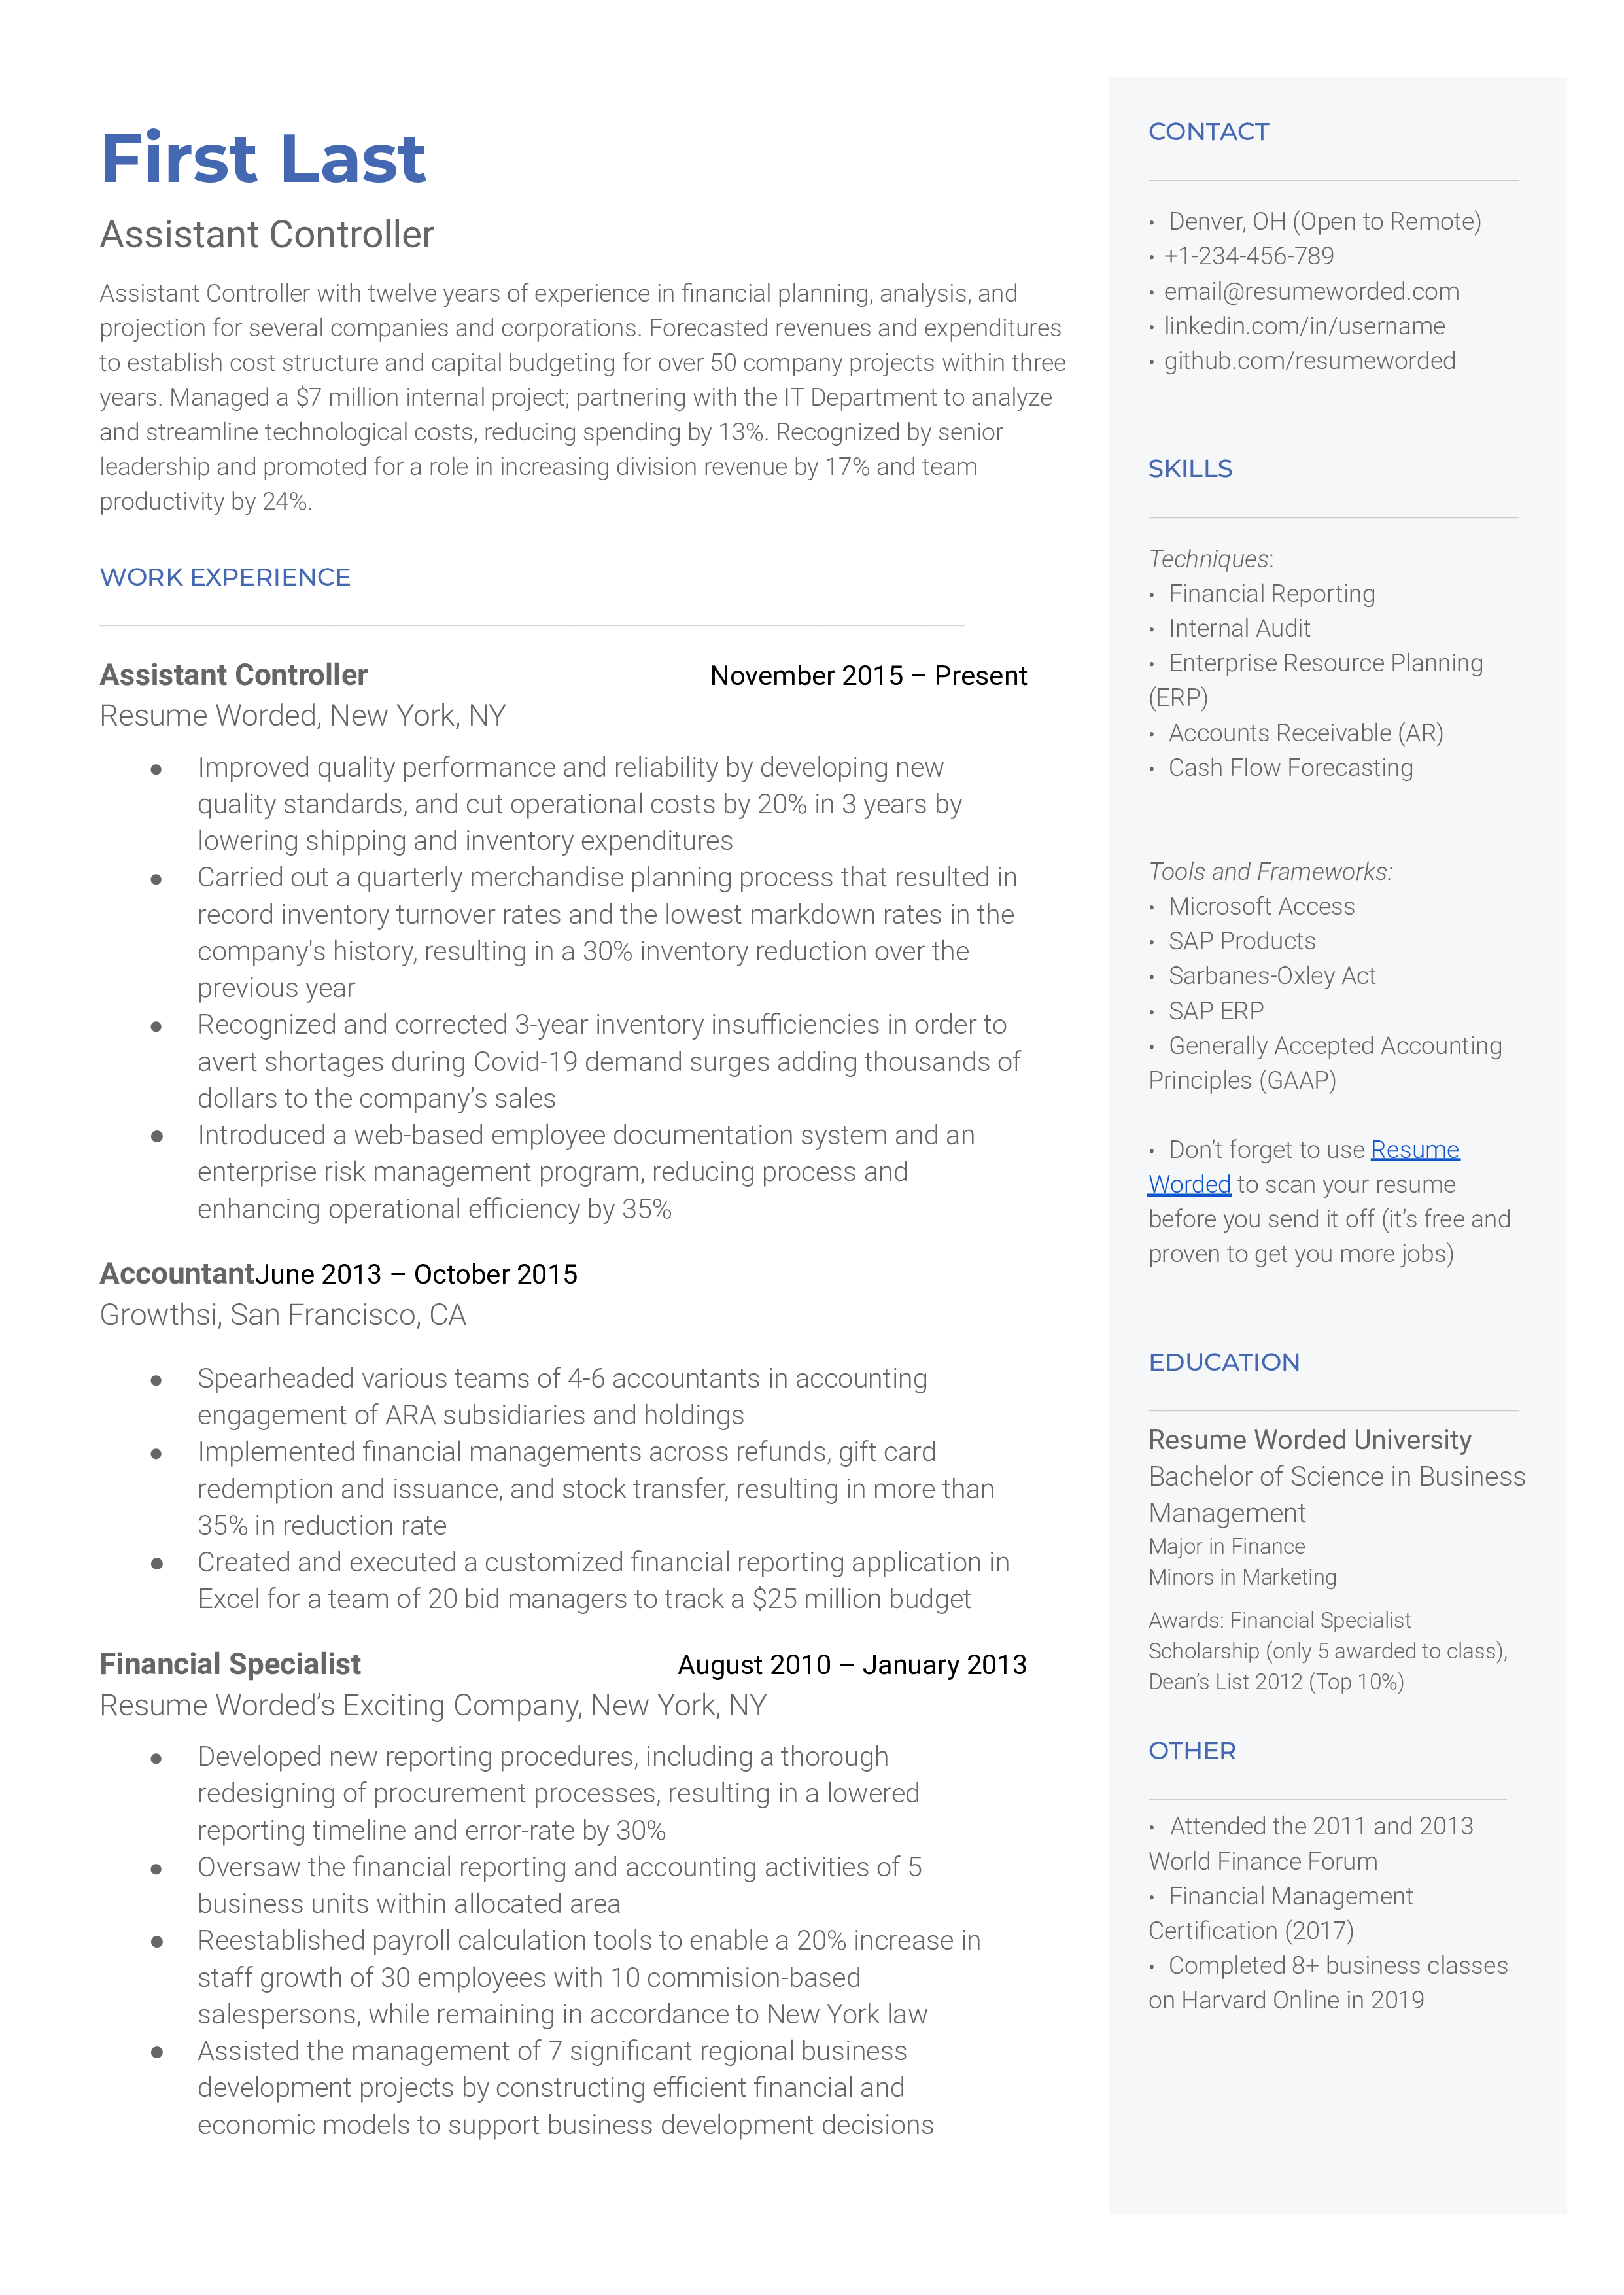 An Assistant Controller CV focusing on technology proficiency and leadership experience.